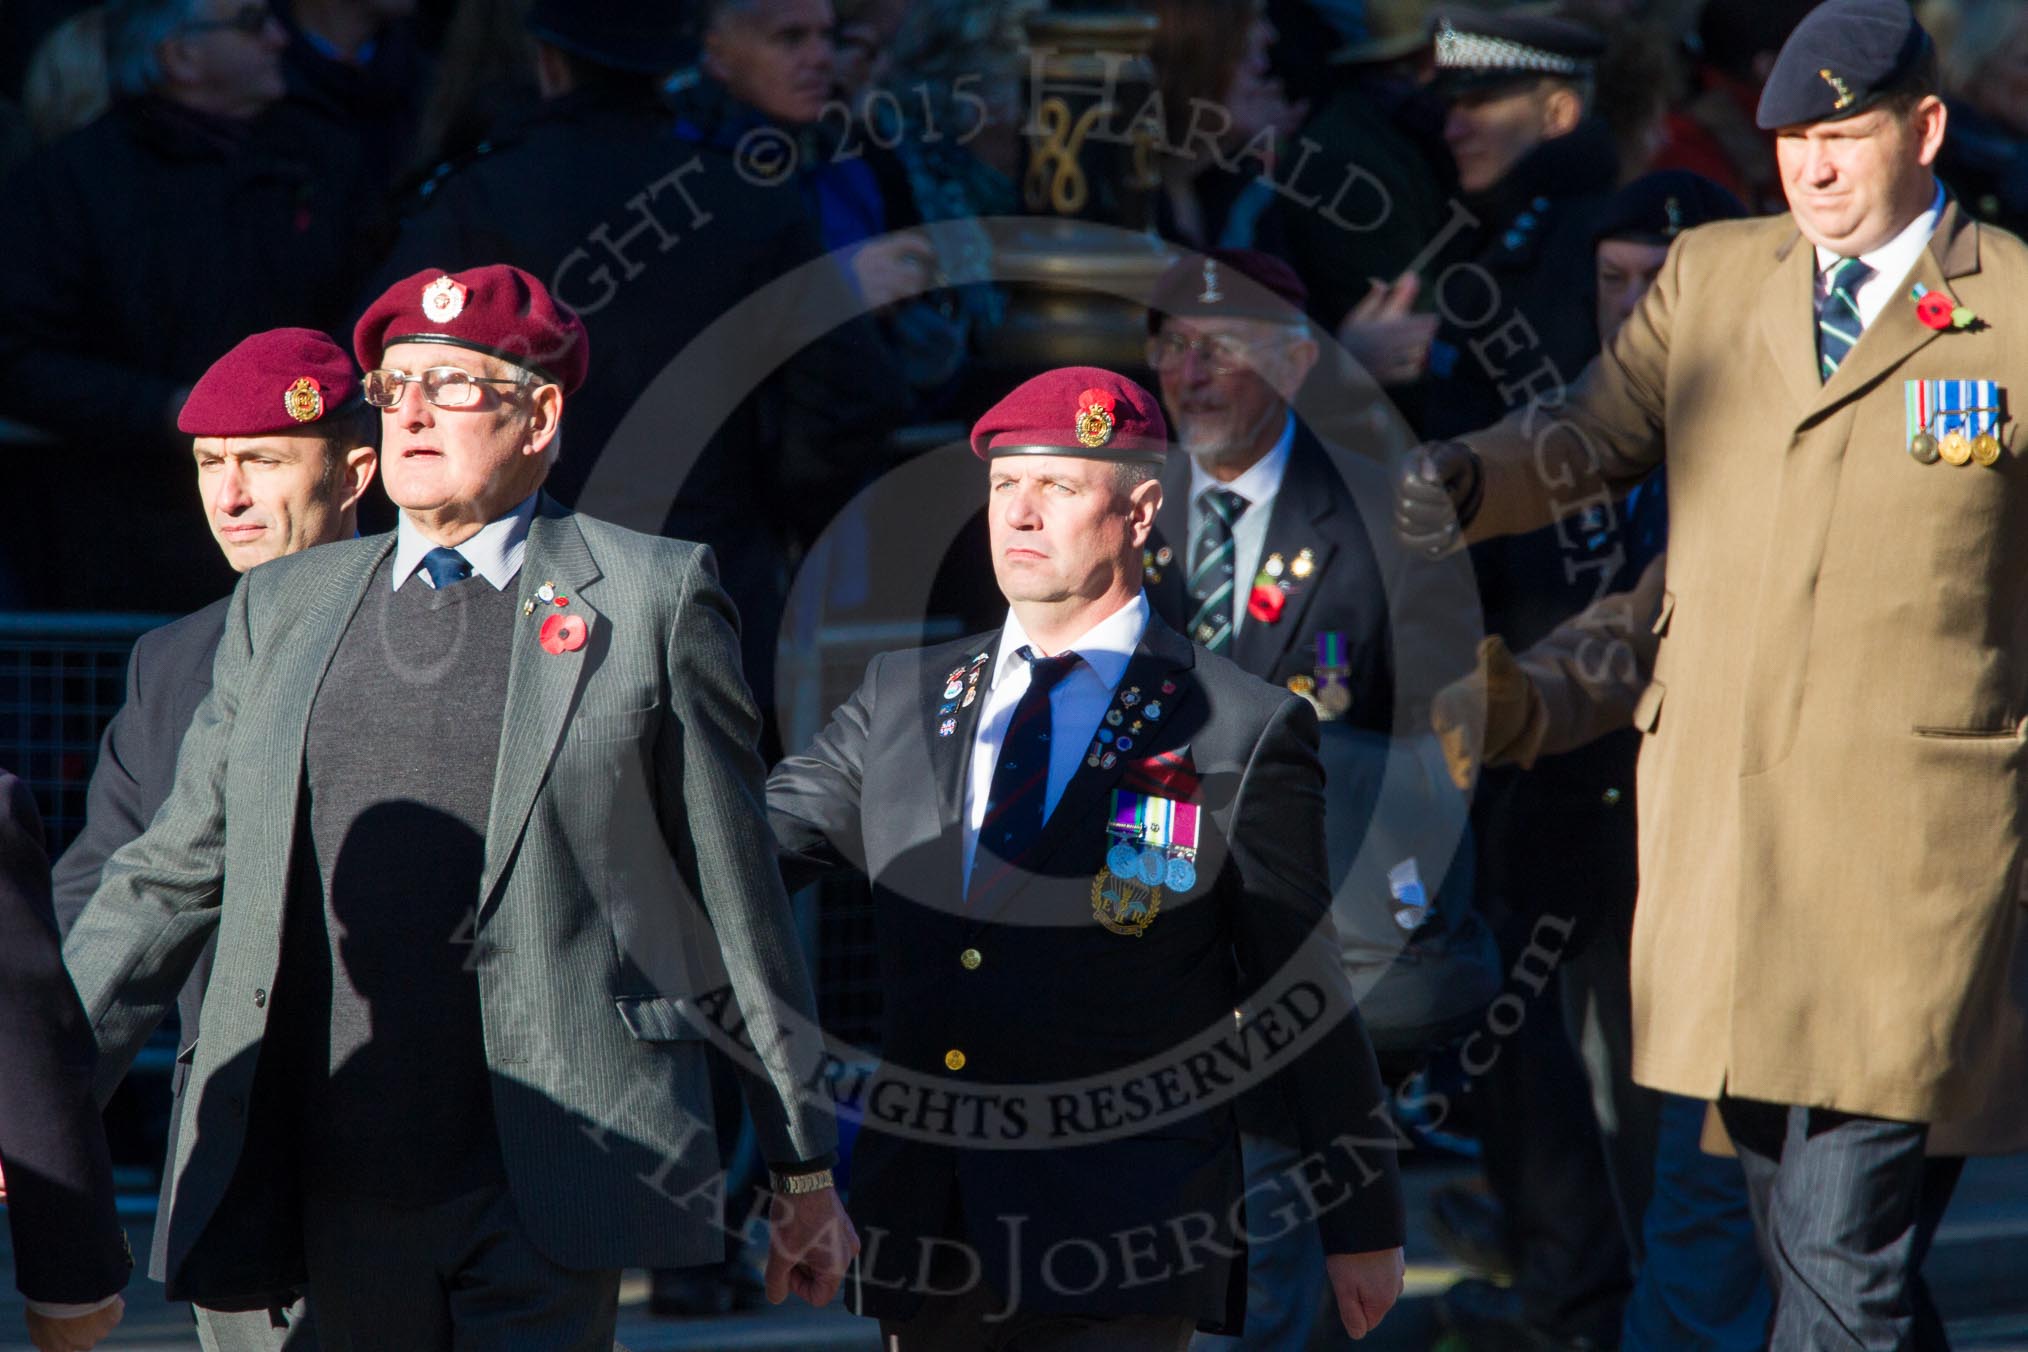 Remembrance Sunday Cenotaph March Past 2013: B22 - Airborne Engineers Association..
Press stand opposite the Foreign Office building, Whitehall, London SW1,
London,
Greater London,
United Kingdom,
on 10 November 2013 at 12:02, image #1498